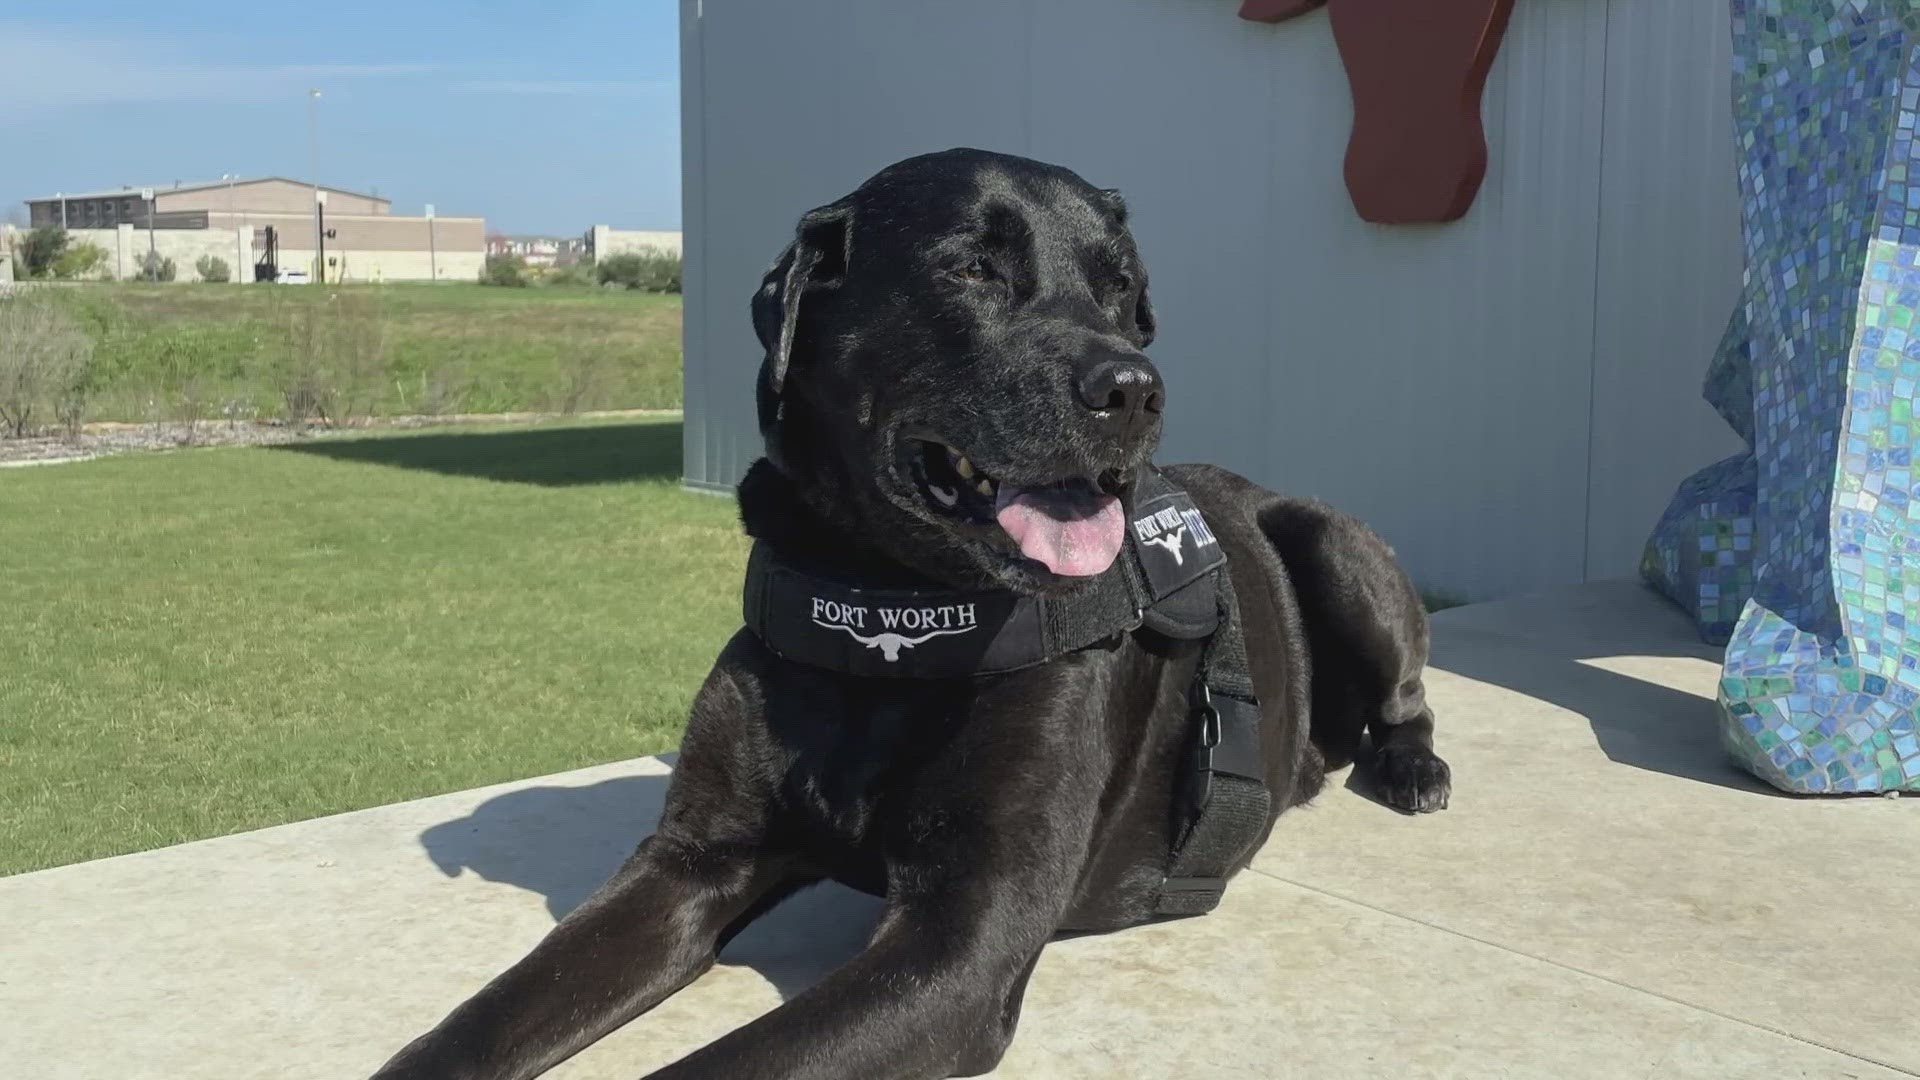 Henry emerged as the recognizable face of the Fort Worth Animal Shelter. He worked for a decade as the city's ambassador to increase awareness for homeless pets.